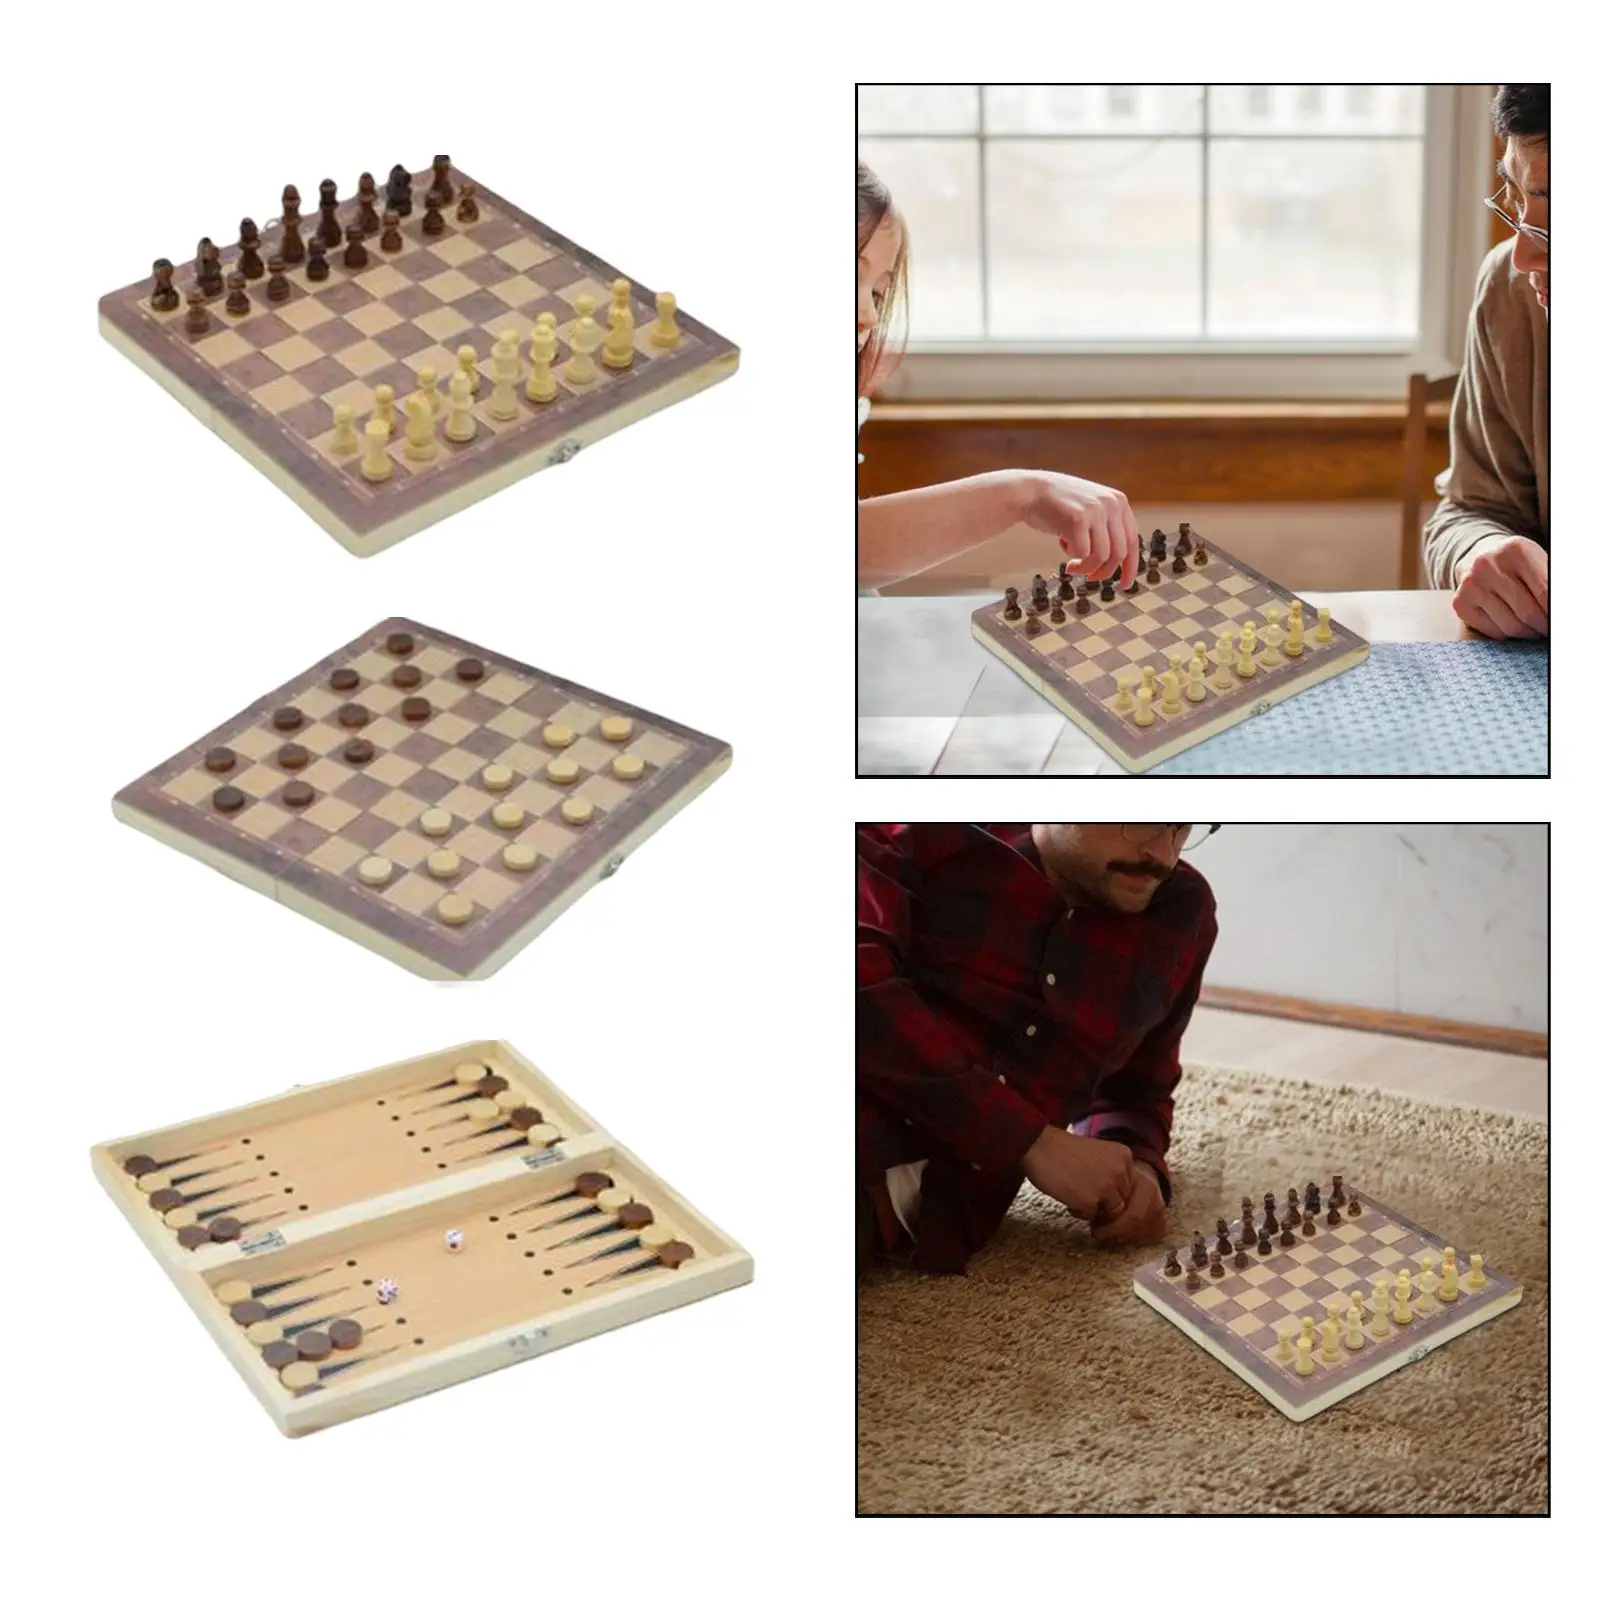 3 in 1 Wooden Chess Set Folding Storage Lightweight Travel Case Portable Board Games for Travel Indoor Home Adults